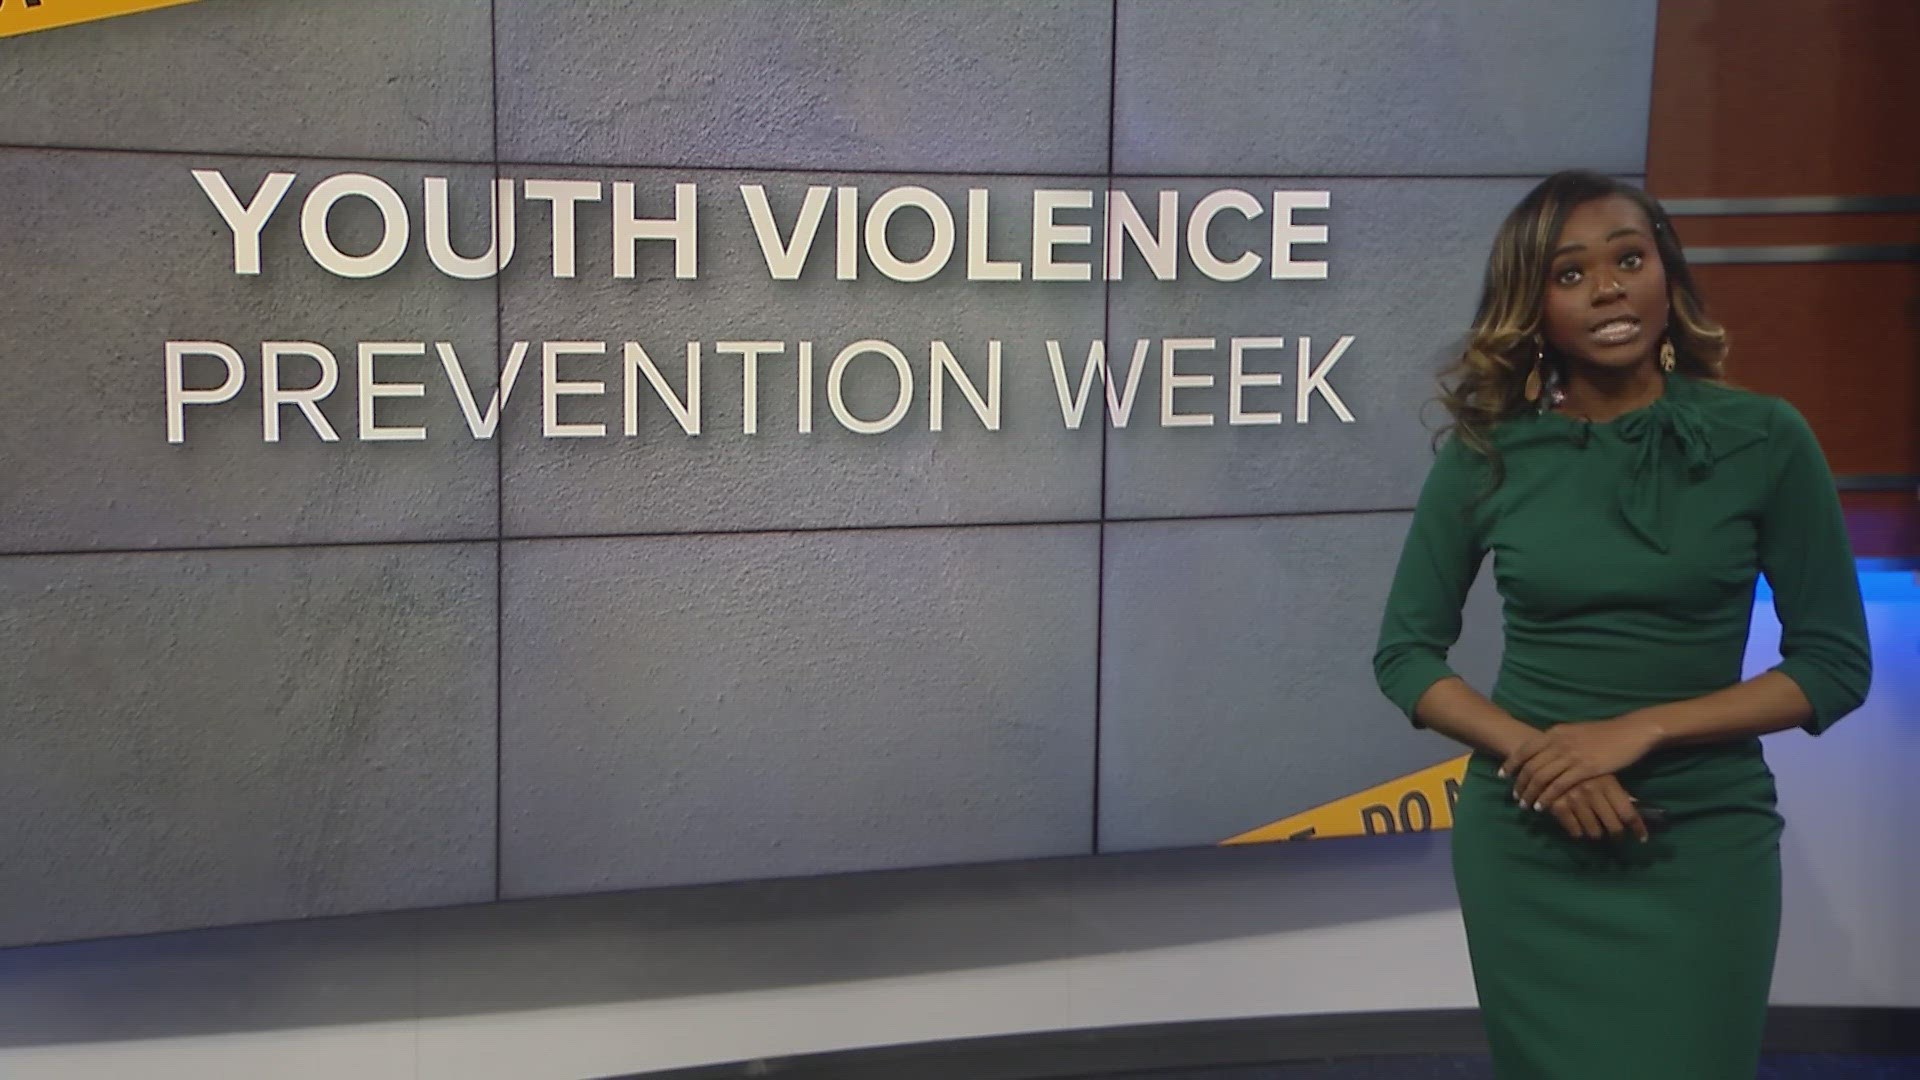 WHAS11's Taylor Woods walks us through the steps the city is taking to prevent violence among young people.